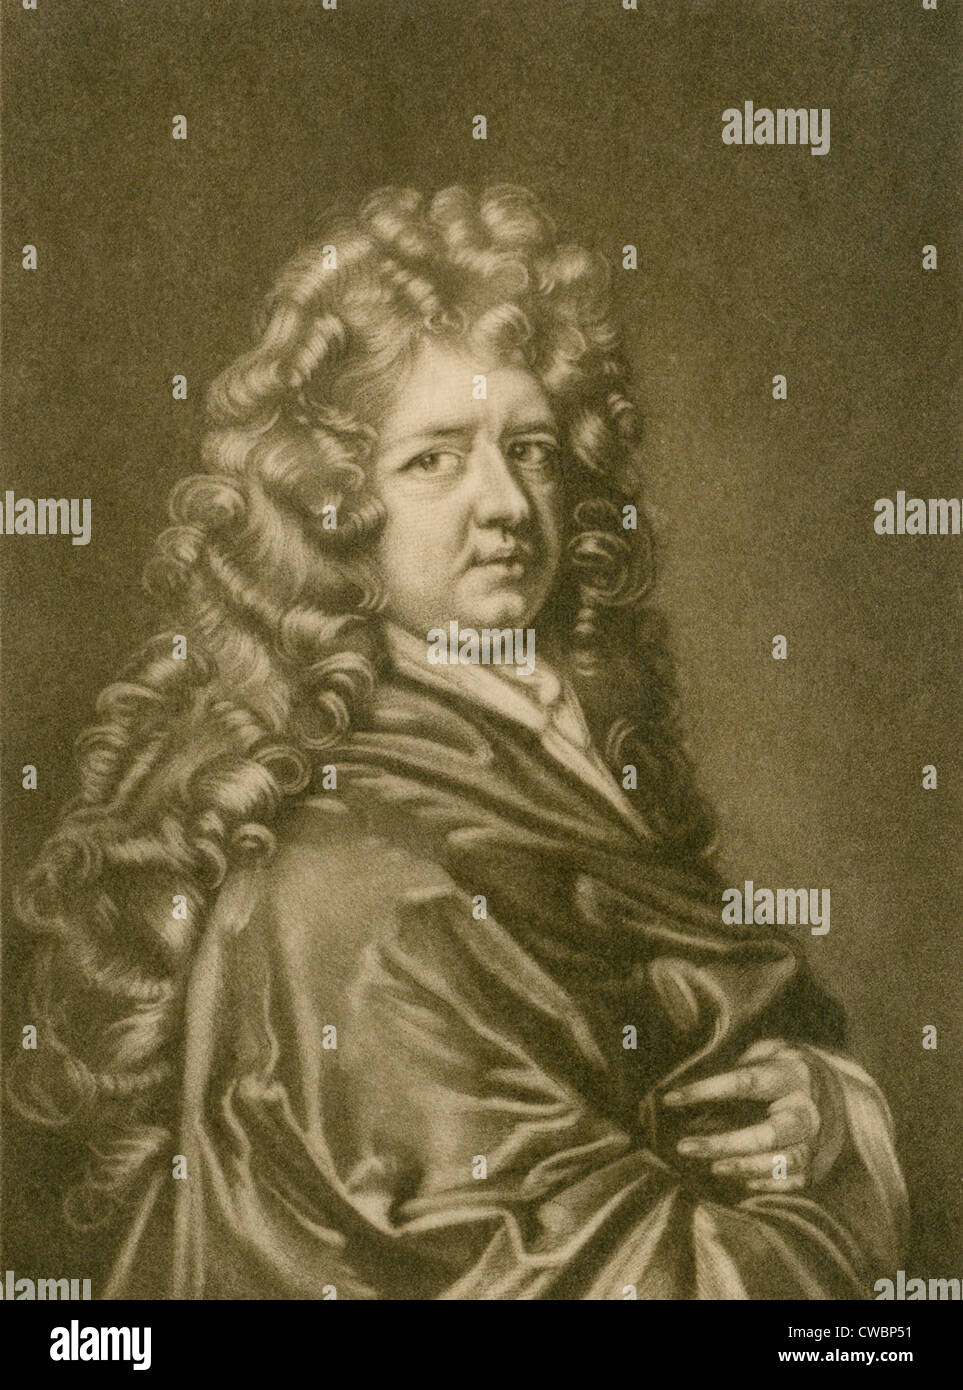 Thomas Betterton (c. 1635-1710), leading English actor of his time, was so highly regarded that he was buried in London's Stock Photo